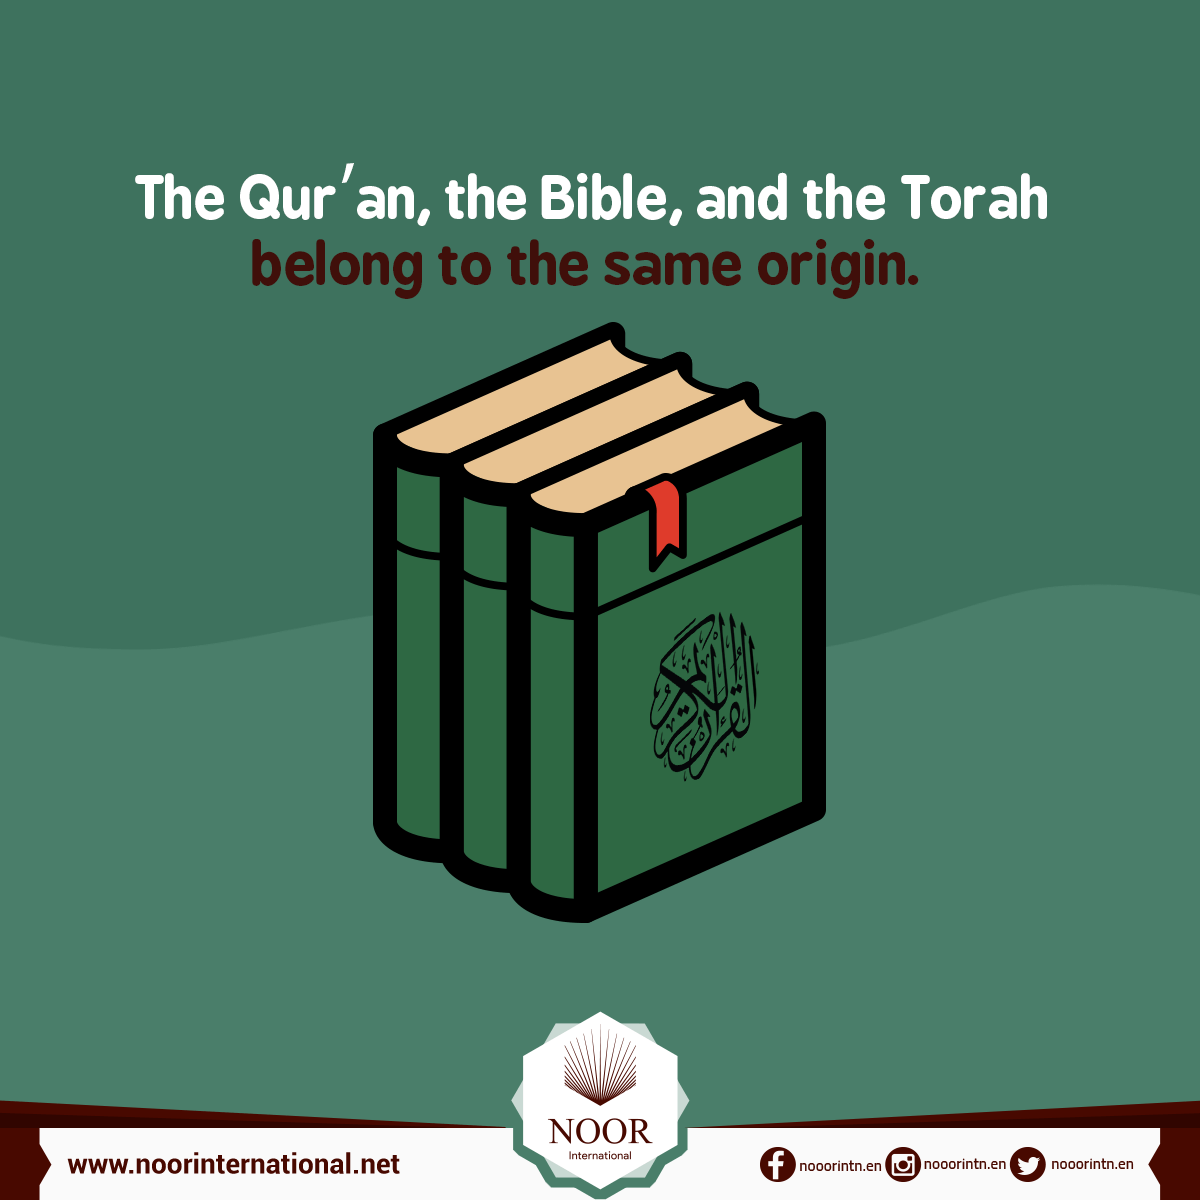 The Qur’an, the Bible, and the Torah..."